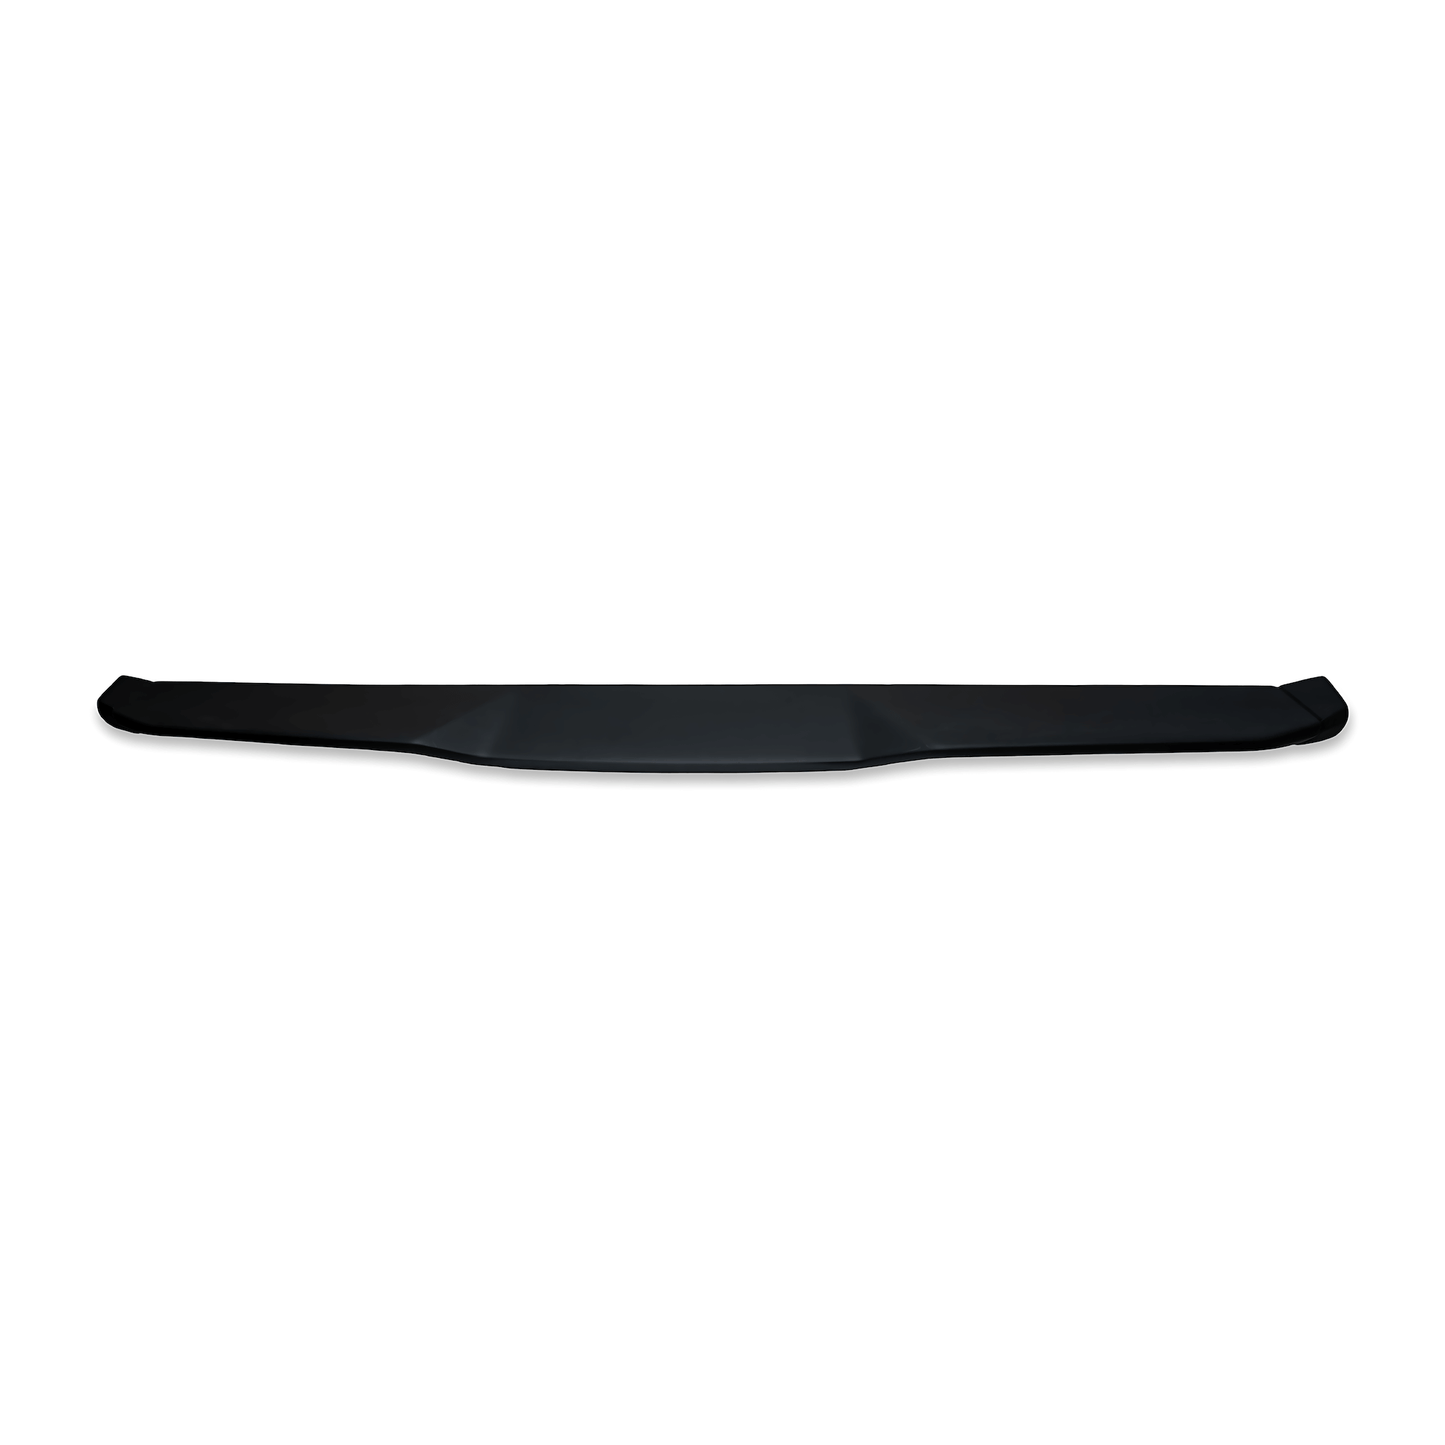 89-99 Chevy/GMC OBS Cresspo Regular Bed 3PC WING